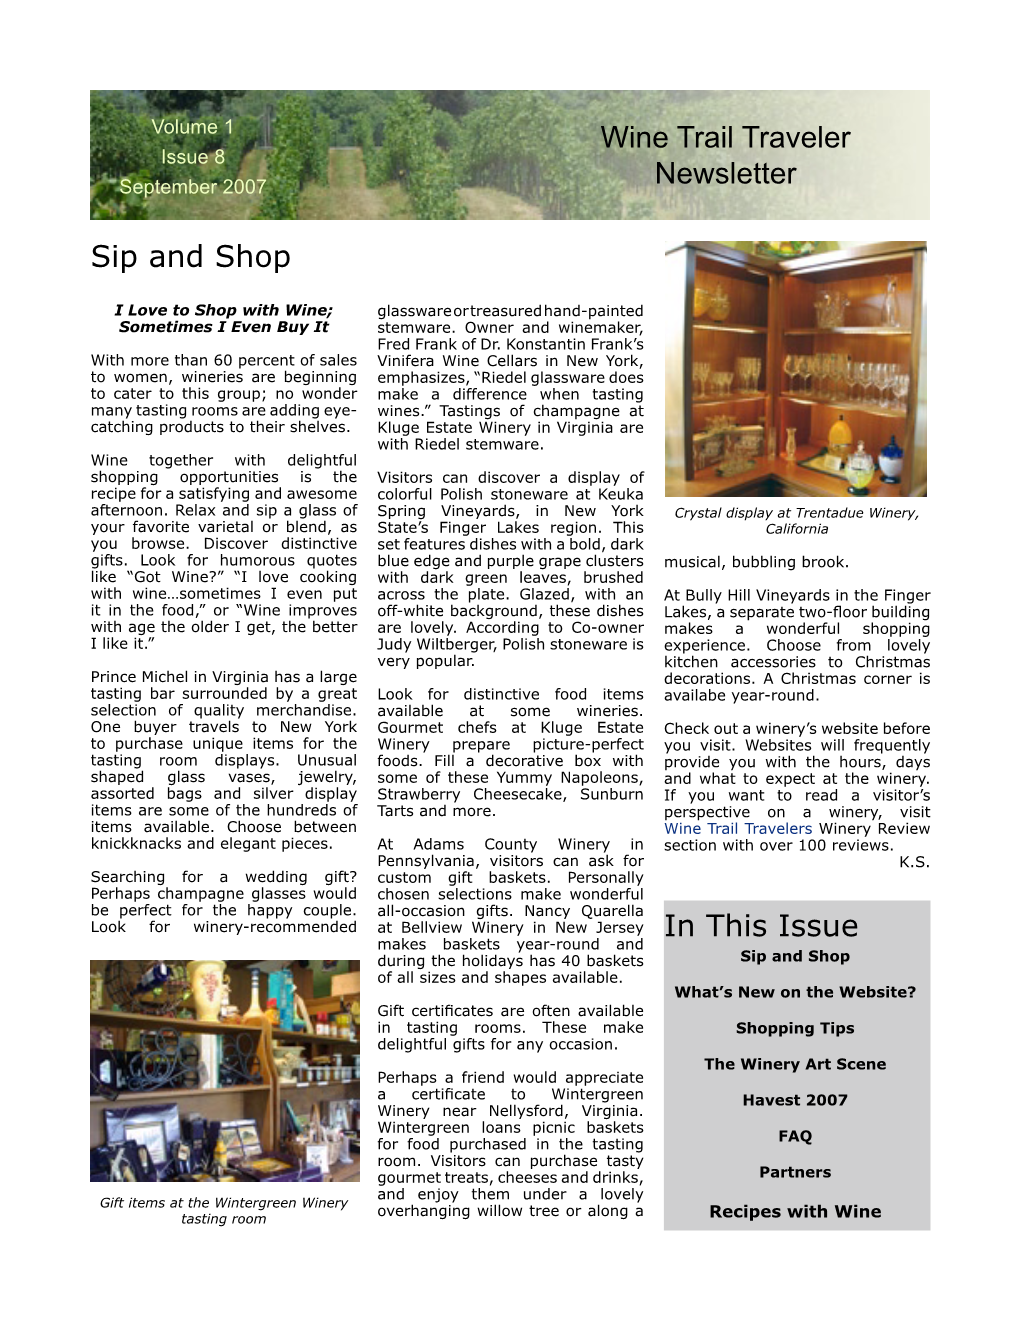 Sip and Shop Wine Trail Traveler Newsletter in This Issue